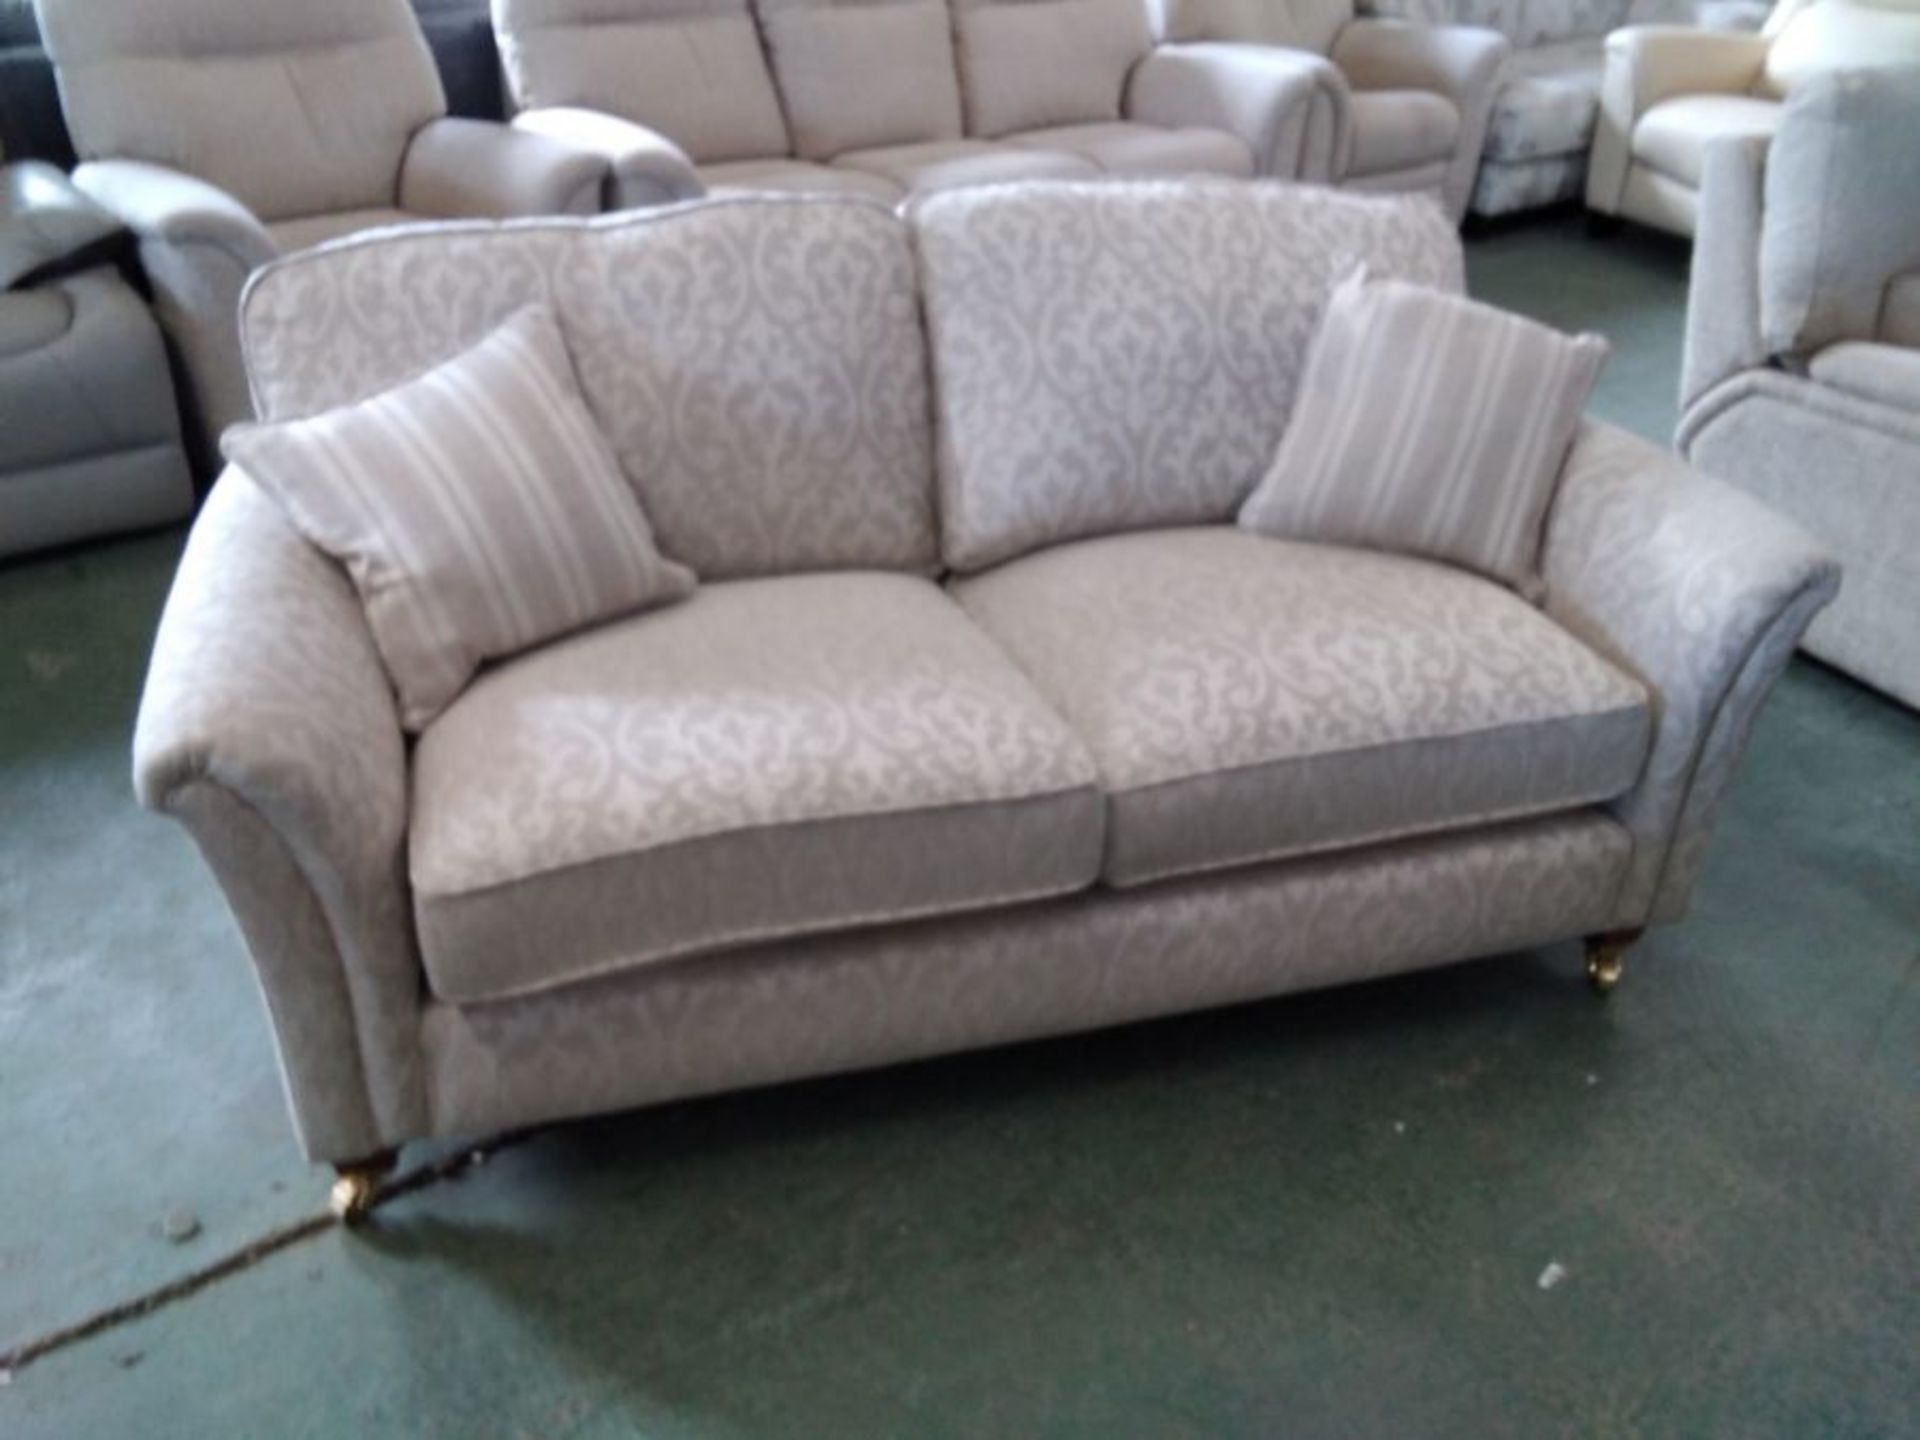 BEIGE PATTERNED 2 SEATER SOFA (TROO2963-WO1430670)